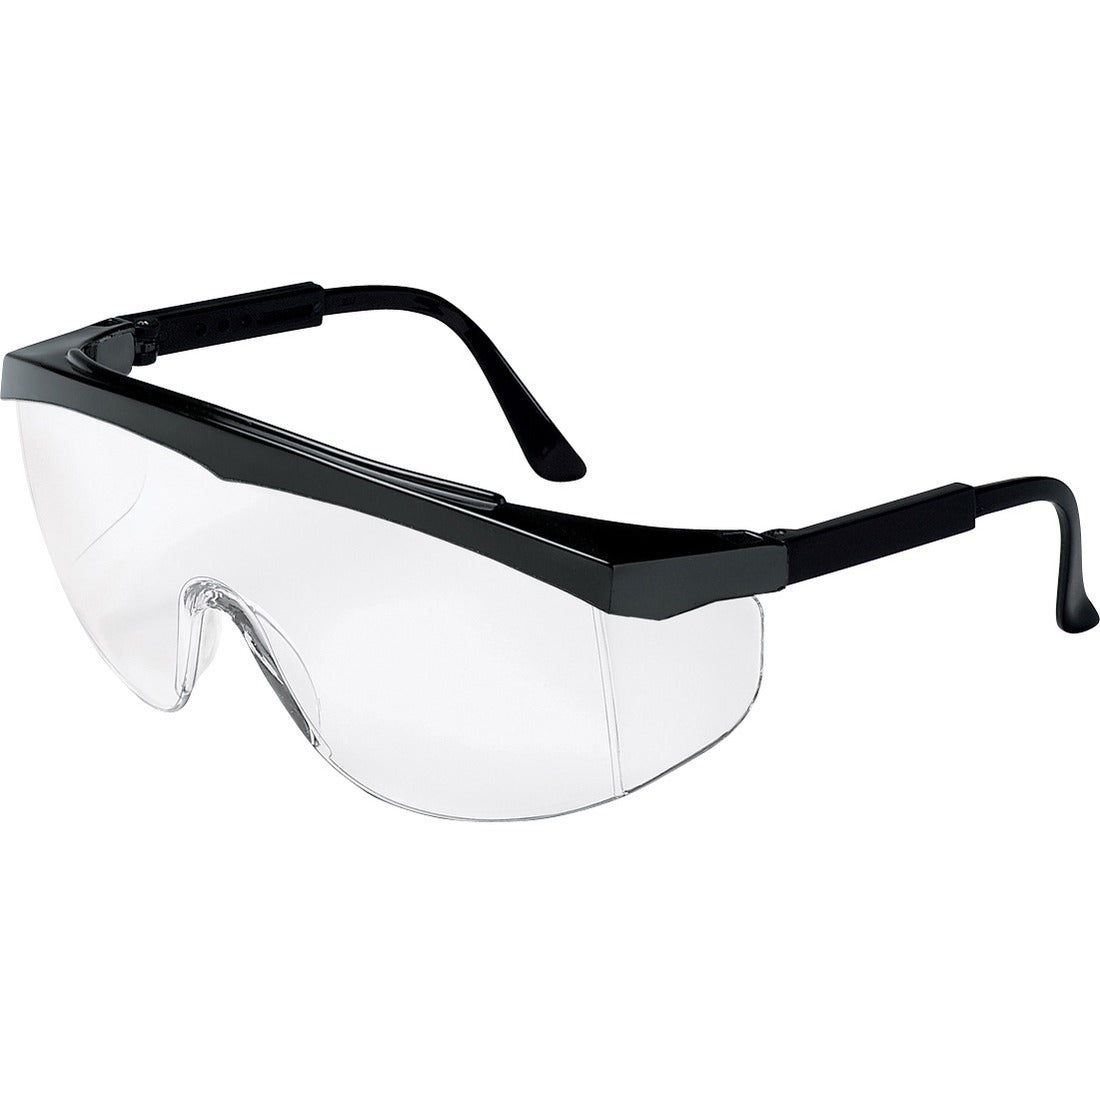 MCR Safety SS1 Series Black Safety Glasses With Clear Lens